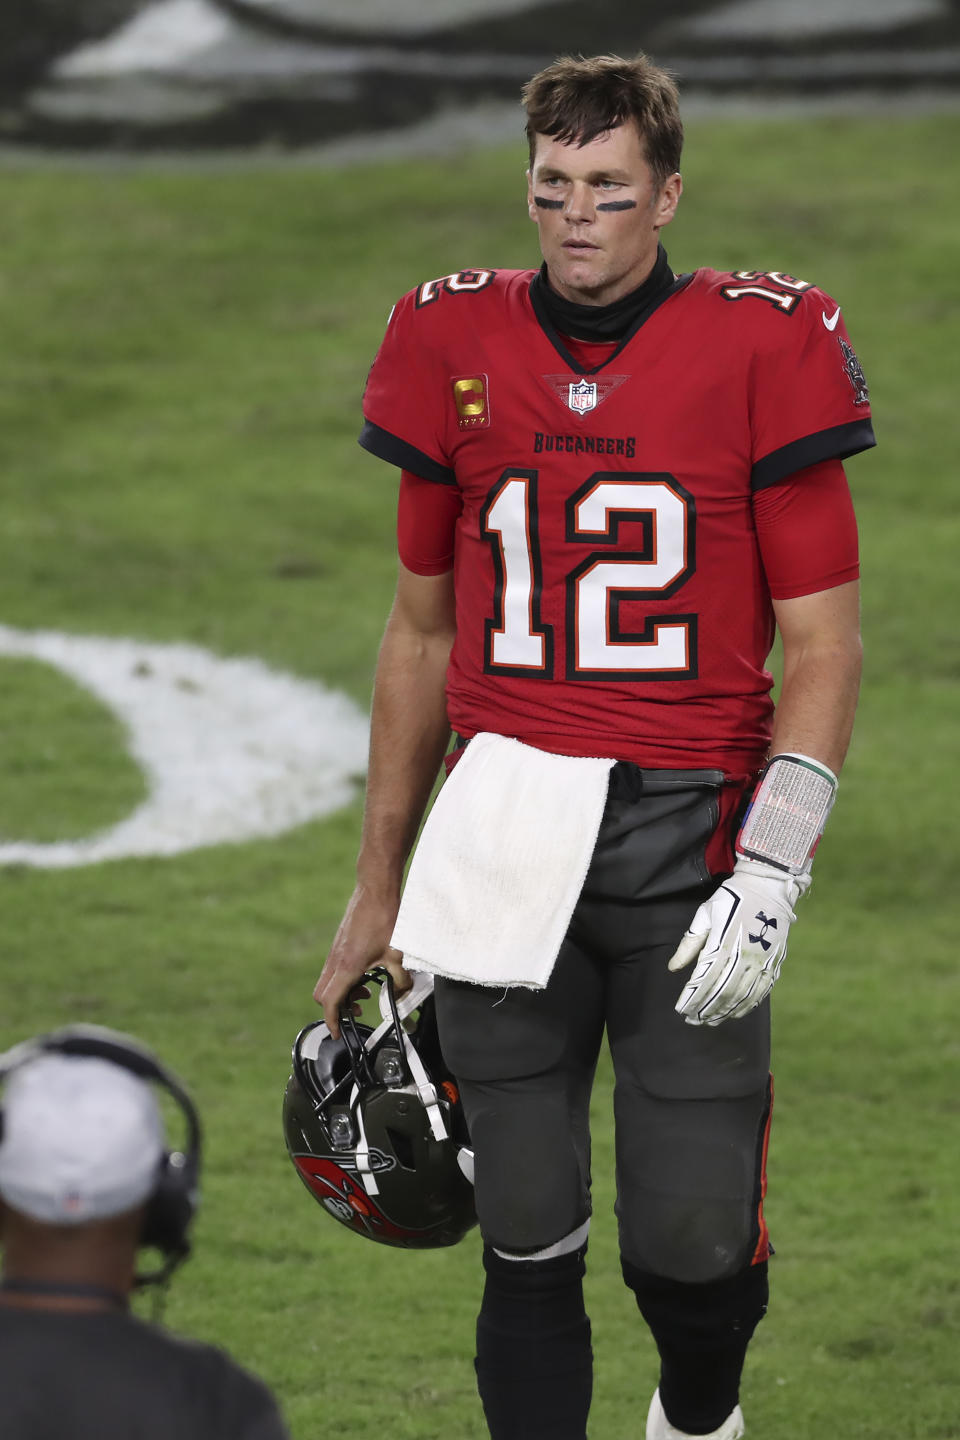 Tampa Bay Buccaneers quarterback Tom Brady (12) reacts as he walks to the bench after throwing an interception to Kansas City Chiefs cornerback Rashad Fenton during the second half of an NFL football game Sunday, Nov. 29, 2020, in Tampa, Fla. (AP Photo/Mark LoMoglio)